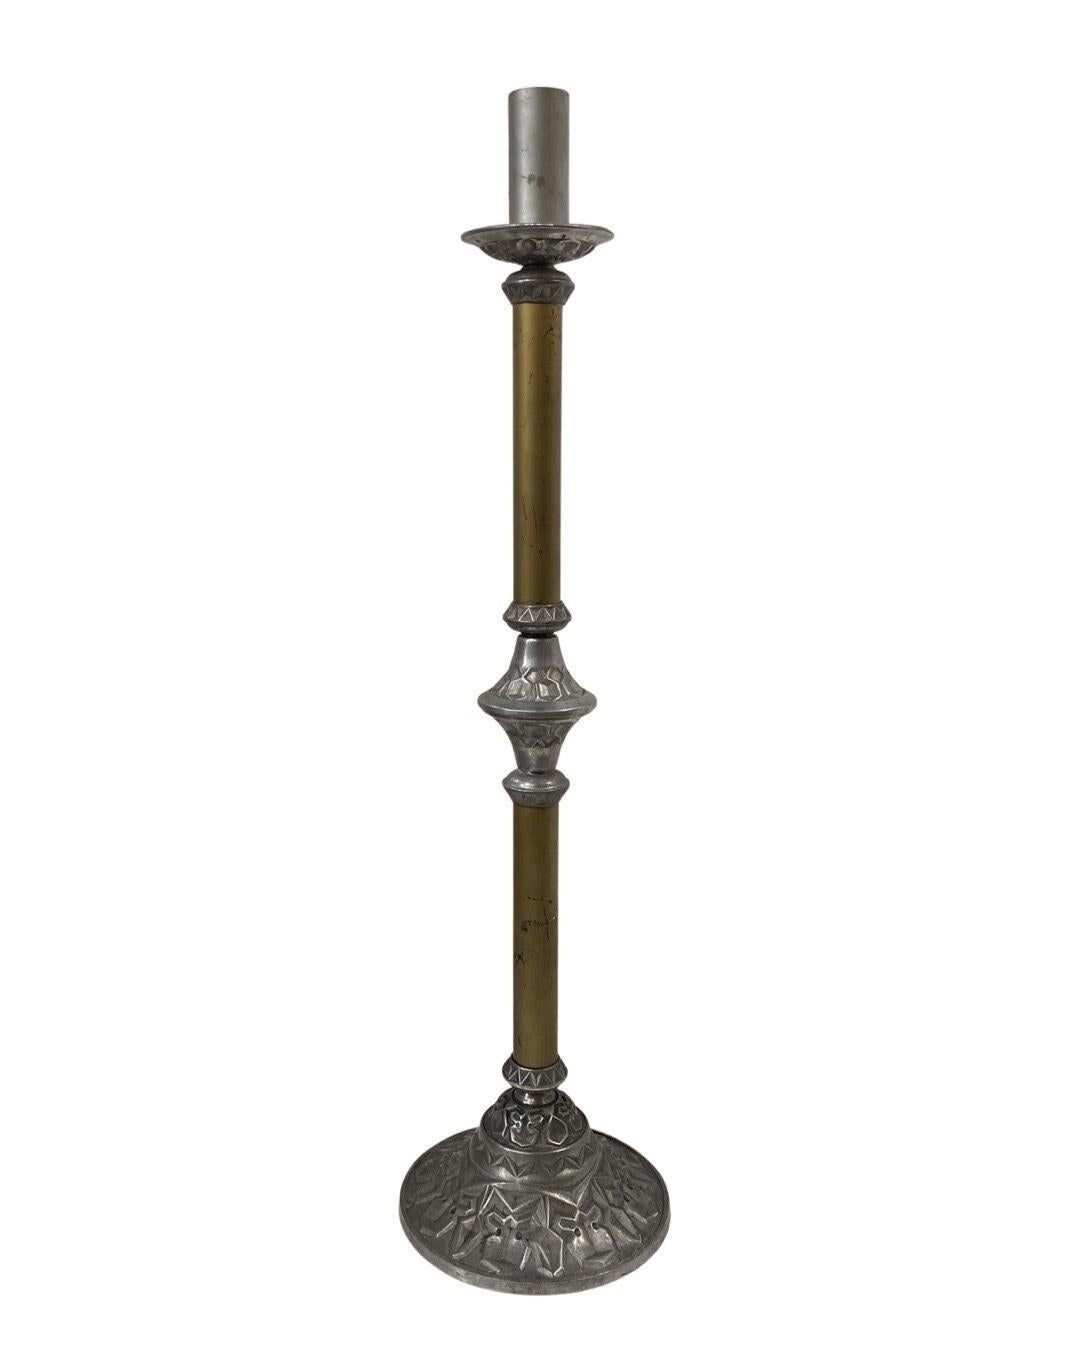 The Arts and Crafts Two Tone Aluminum and Brass Art Deco Floor Standing Candelabra is a unique piece that combines elements from both the Arts and Crafts movement and the Art Deco style.

The Arts and Crafts movement, which emerged in the late 19th